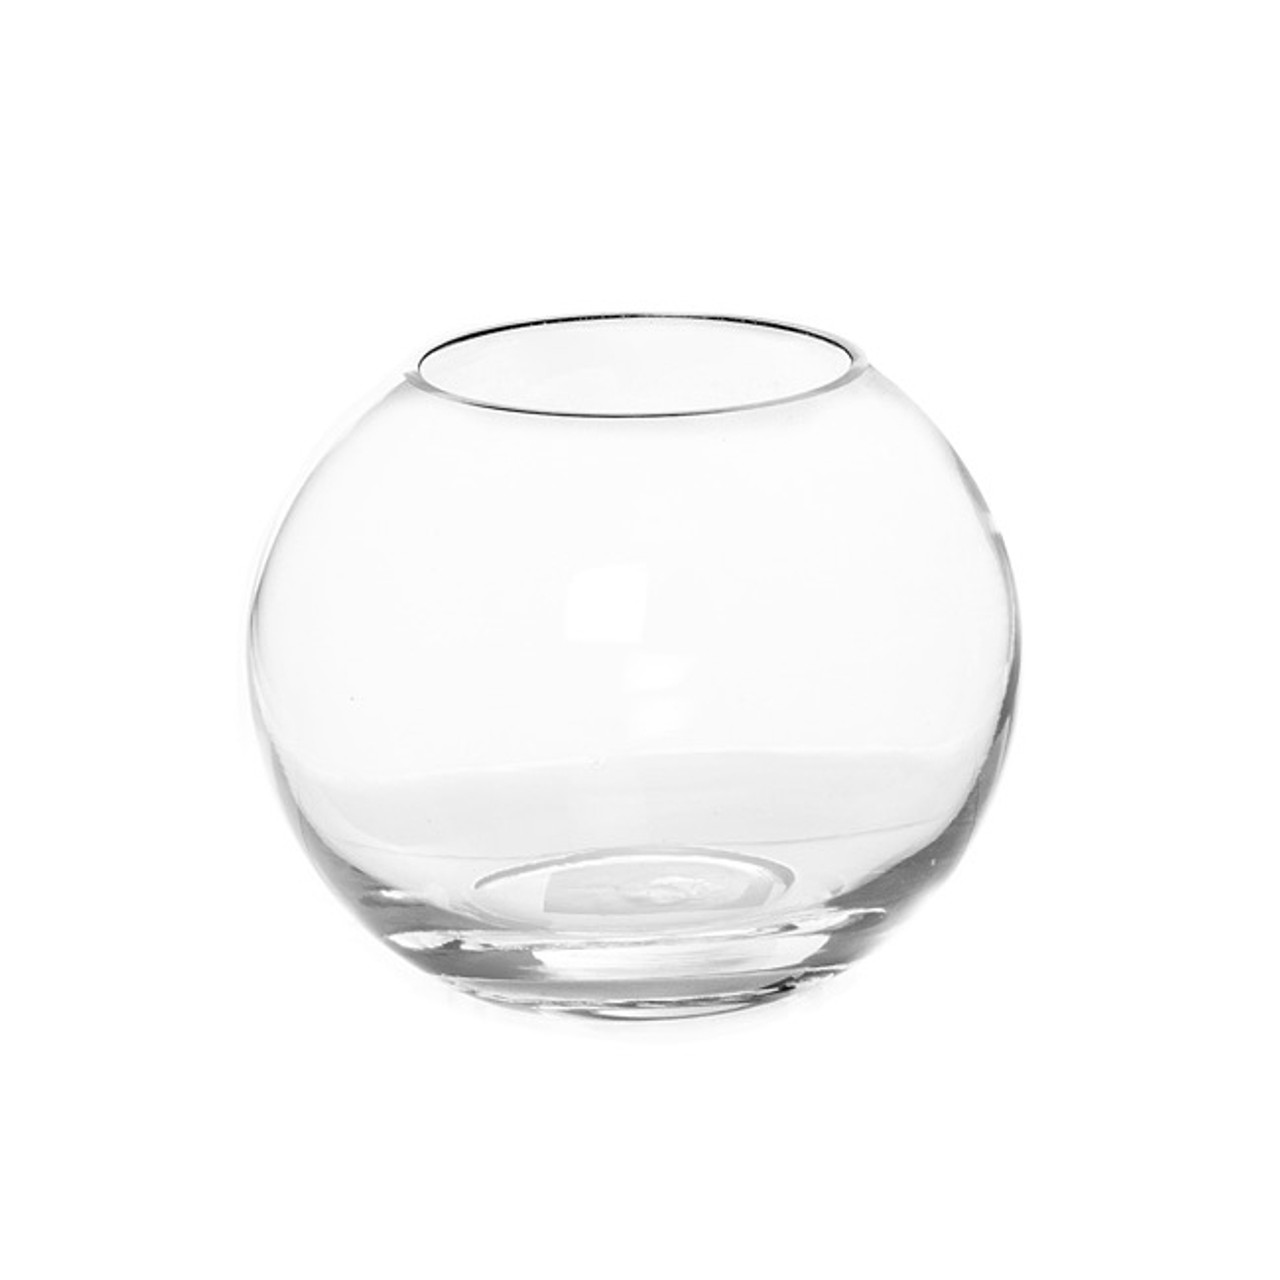 Vases - Glass Fish Bowl Medium - Botanique Flowers and Gifts